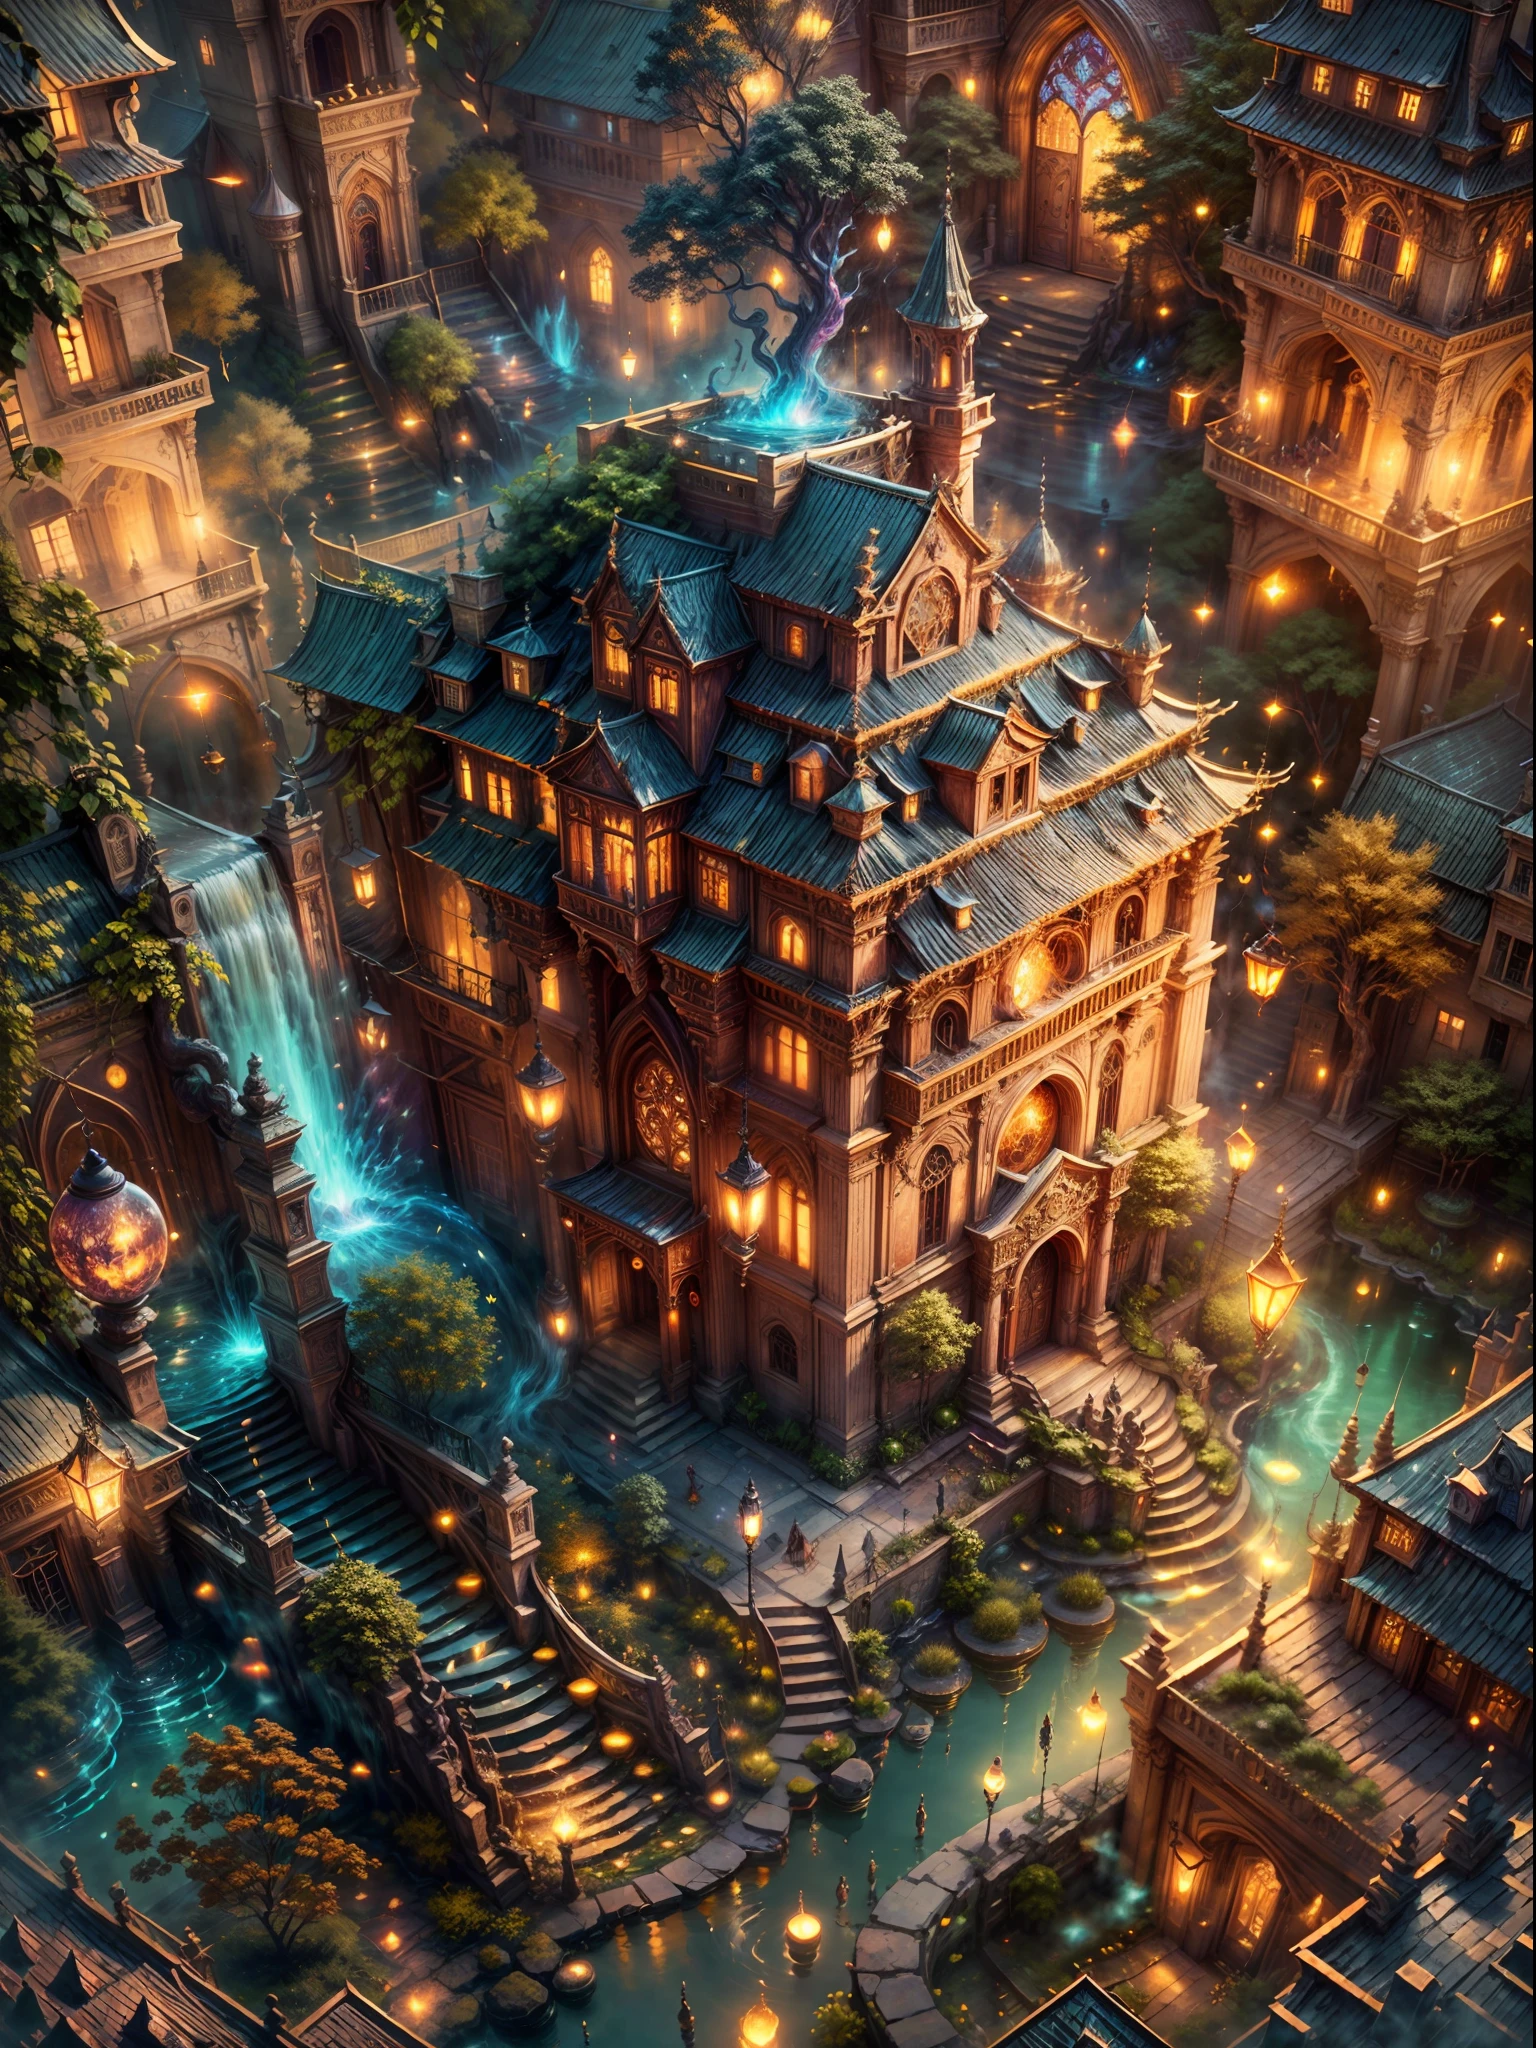 (best quality,4k,8k,highres,masterpiece:1.2),ultra-detailed,(realistic,photorealistic,photo-realistic:1.37),aerial view,magic academy,winx,magic aura,golden architecture,grand halls,enchanted corridors,majestic towers,mystical atmosphere,vibrant colors,sparkling lights,unforgettable landscapes,students practicing spells,wizards displaying their skills,books filled with ancient knowledge,magical creatures,ethereal music,floating candles,gorgeous gardens,whispering trees,splendid fountains,enchanted waterfalls,celestial ceiling paintings,hanging tapestries,elaborate stained glass windows,flying brooms,majestic dragon statues,secret passages,hidden chambers,sunlit courtyards,a sense of wonder and mystery.